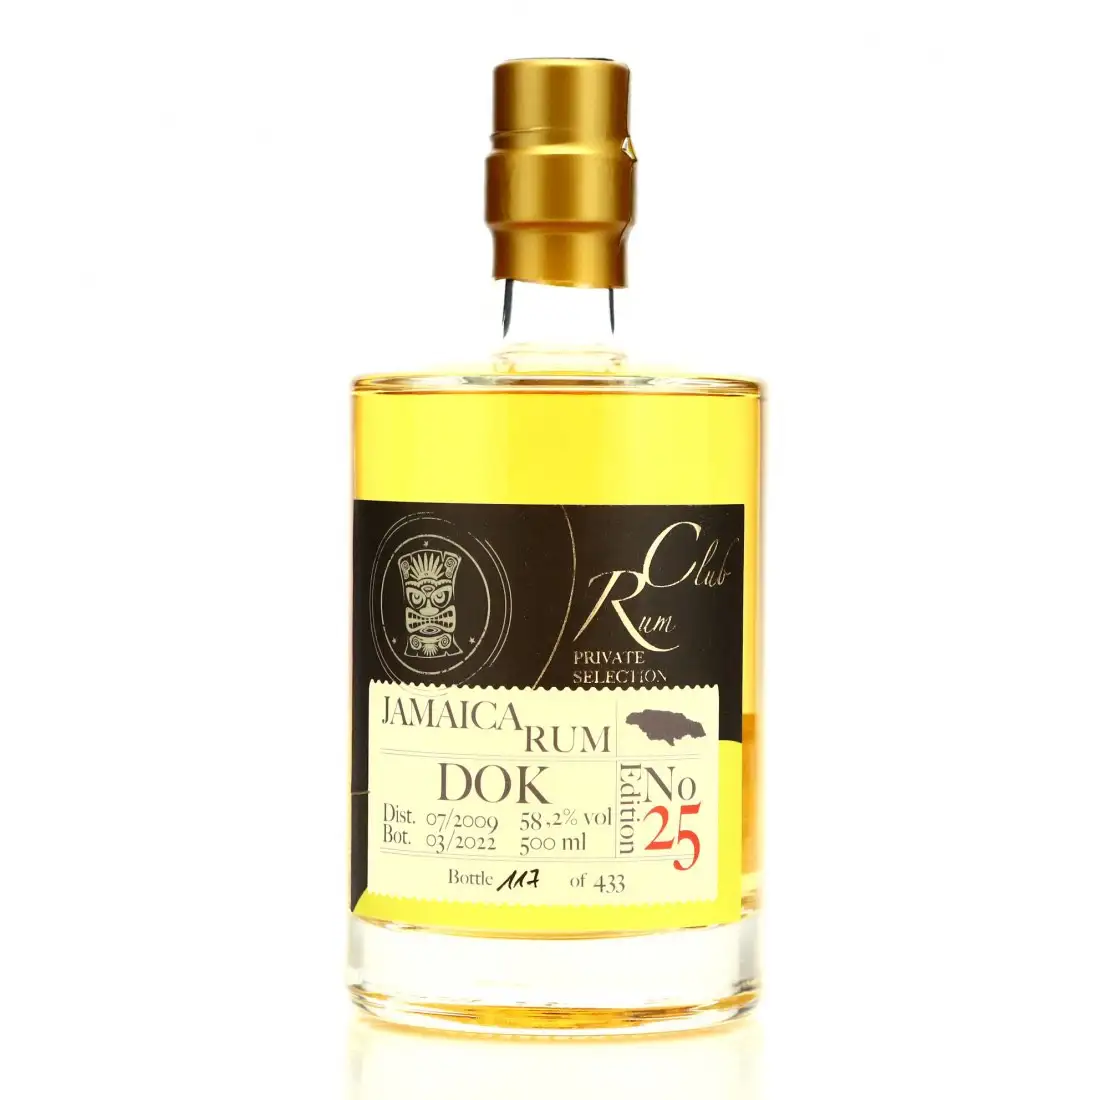 Image of the front of the bottle of the rum Rumclub Private Selection Ed. 25 DOK